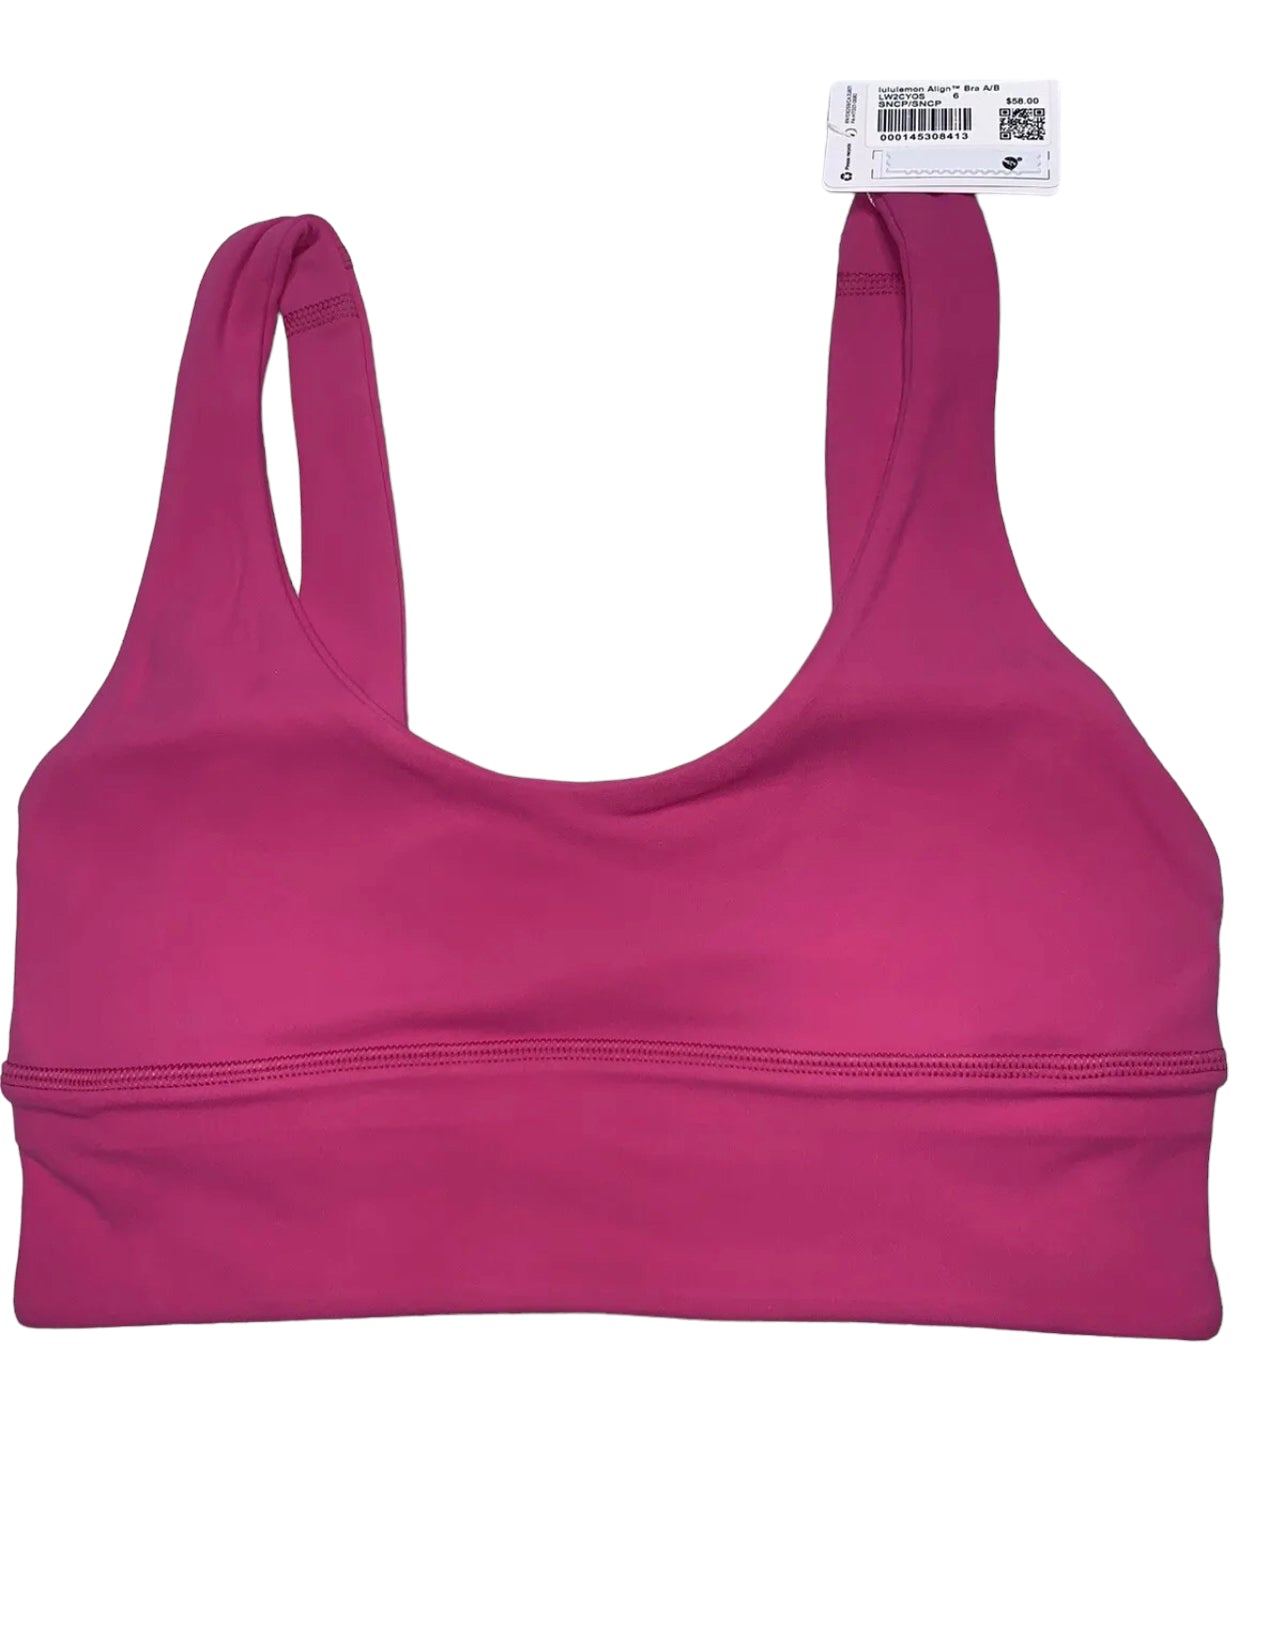 Moonlit magenta grooves & align bra with my sonic pink cropped